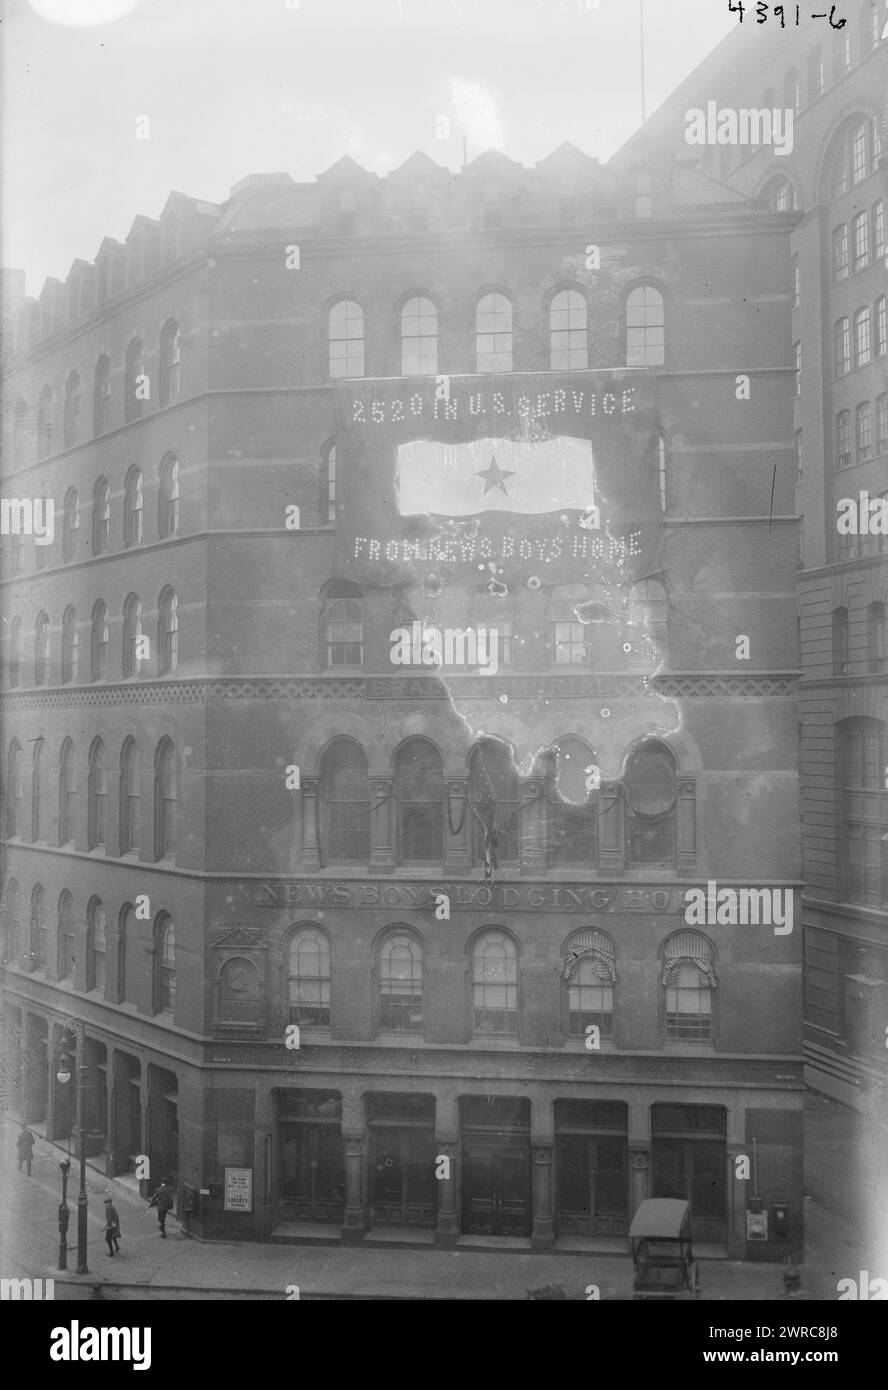 Exterior of building with banner reading '2520 in U.S. service from News Boys Home', Photograph shows banner outside the News Boys Lodging House, 9 Duane street, New York City, showing number of people in military service during World War I., between 1917 and 1918, World War, 1914-1918, Glass negatives, 1 negative: glass Stock Photo